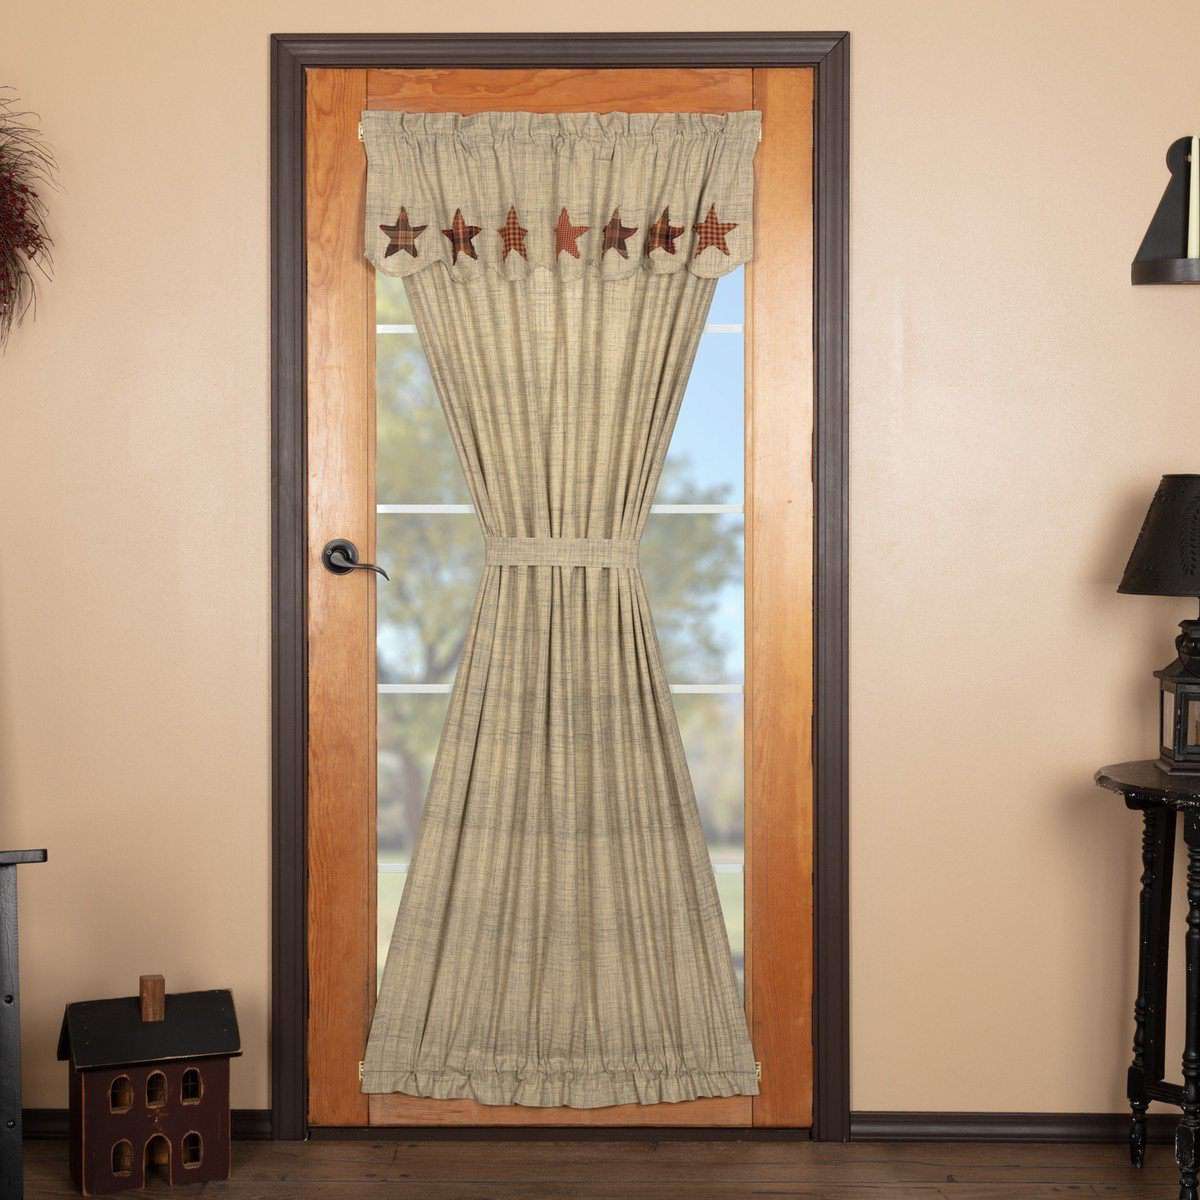 Abilene Star Door Panel with Attached Valance 72"x40" curtain VHC Brands 